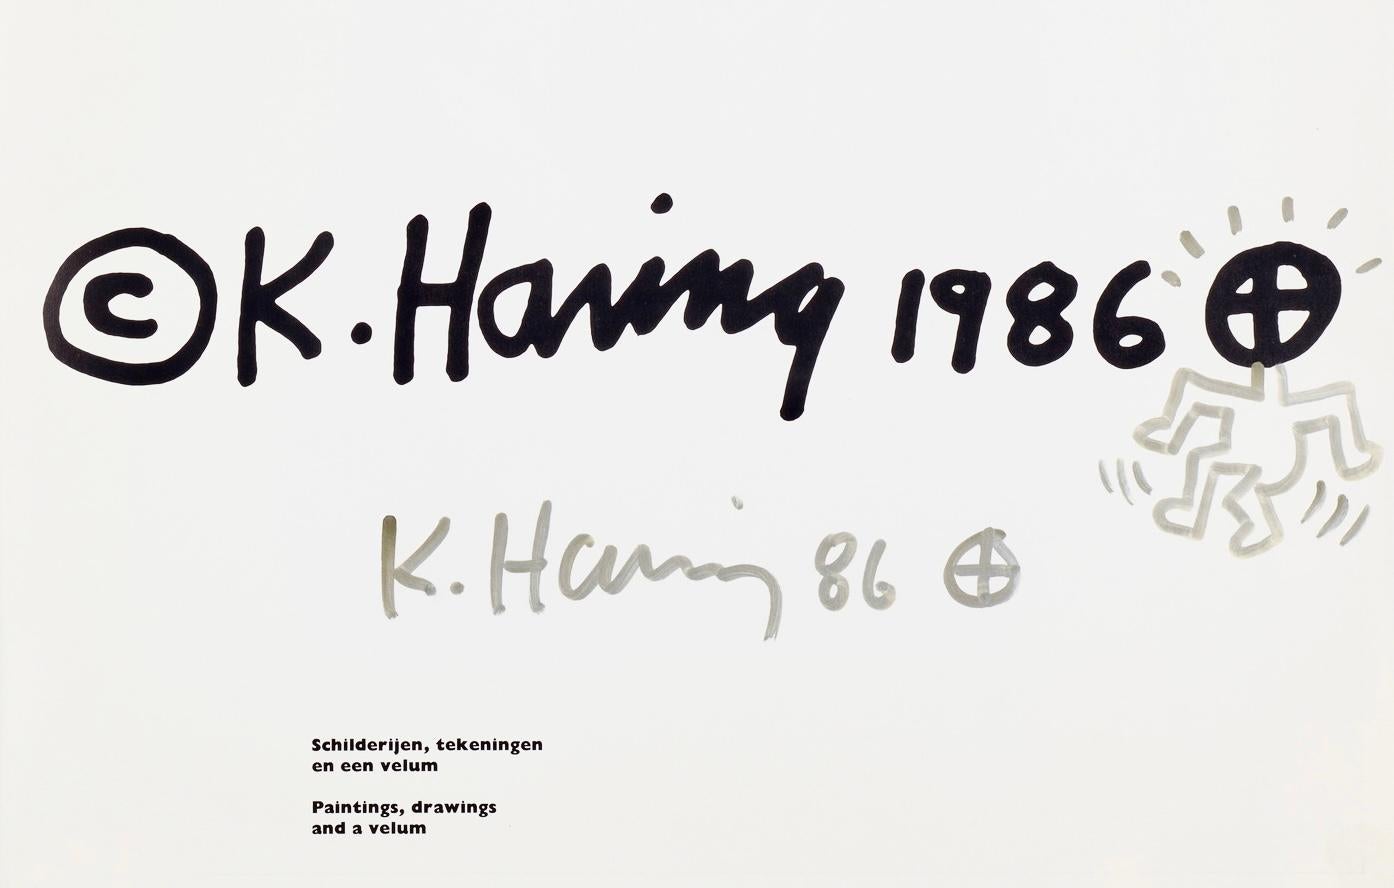 Keith Haring Stedelijk Museum drawing & catalogue (signed Keith Haring drawing)  For Sale 1